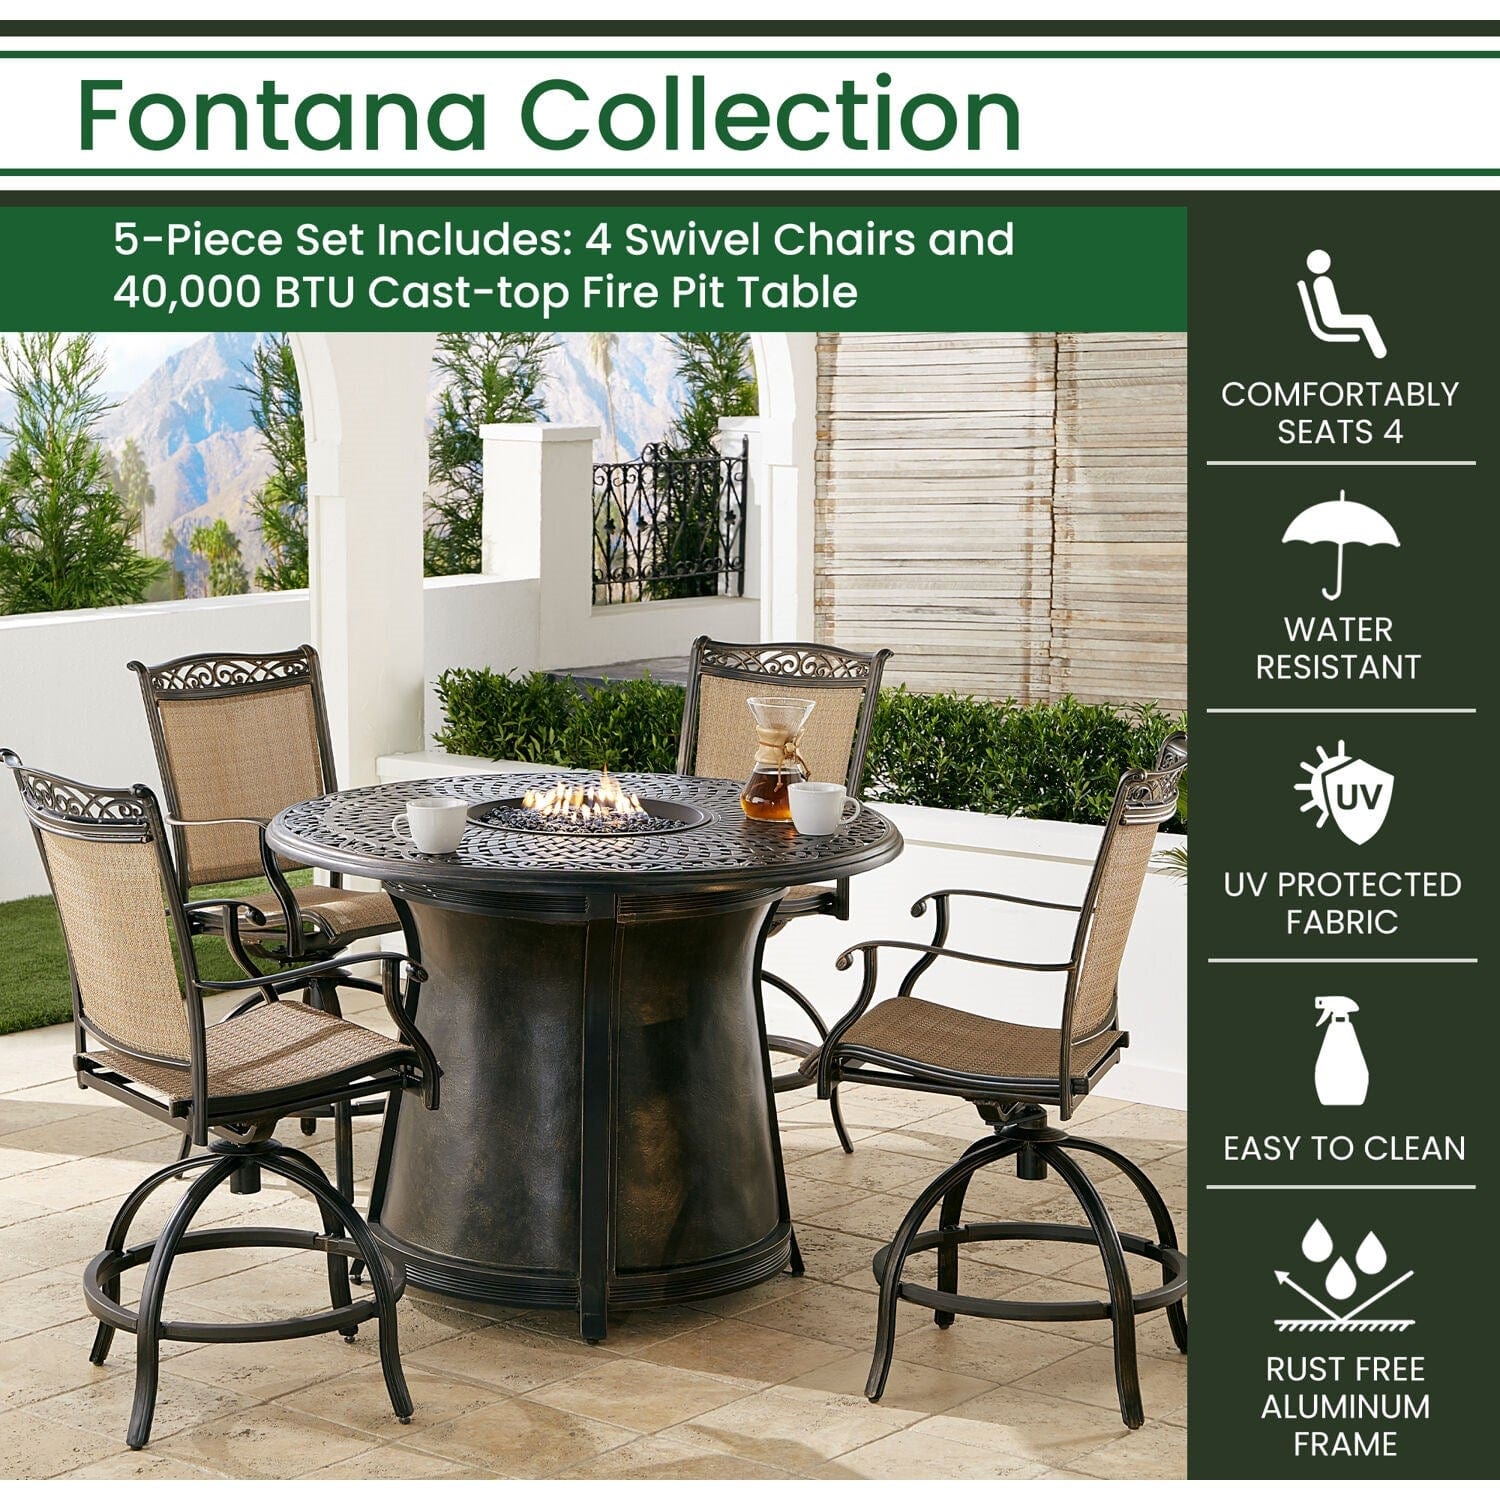 Hanover Fire Pit Dining Set Hanover Fontana 5-Piece High-Dining Set in Tan with 4 Counter-Height Swivel Chairs and a 40,000 BTU Cast-top Fire Pit Table | FNT5PCPFPRD-BR